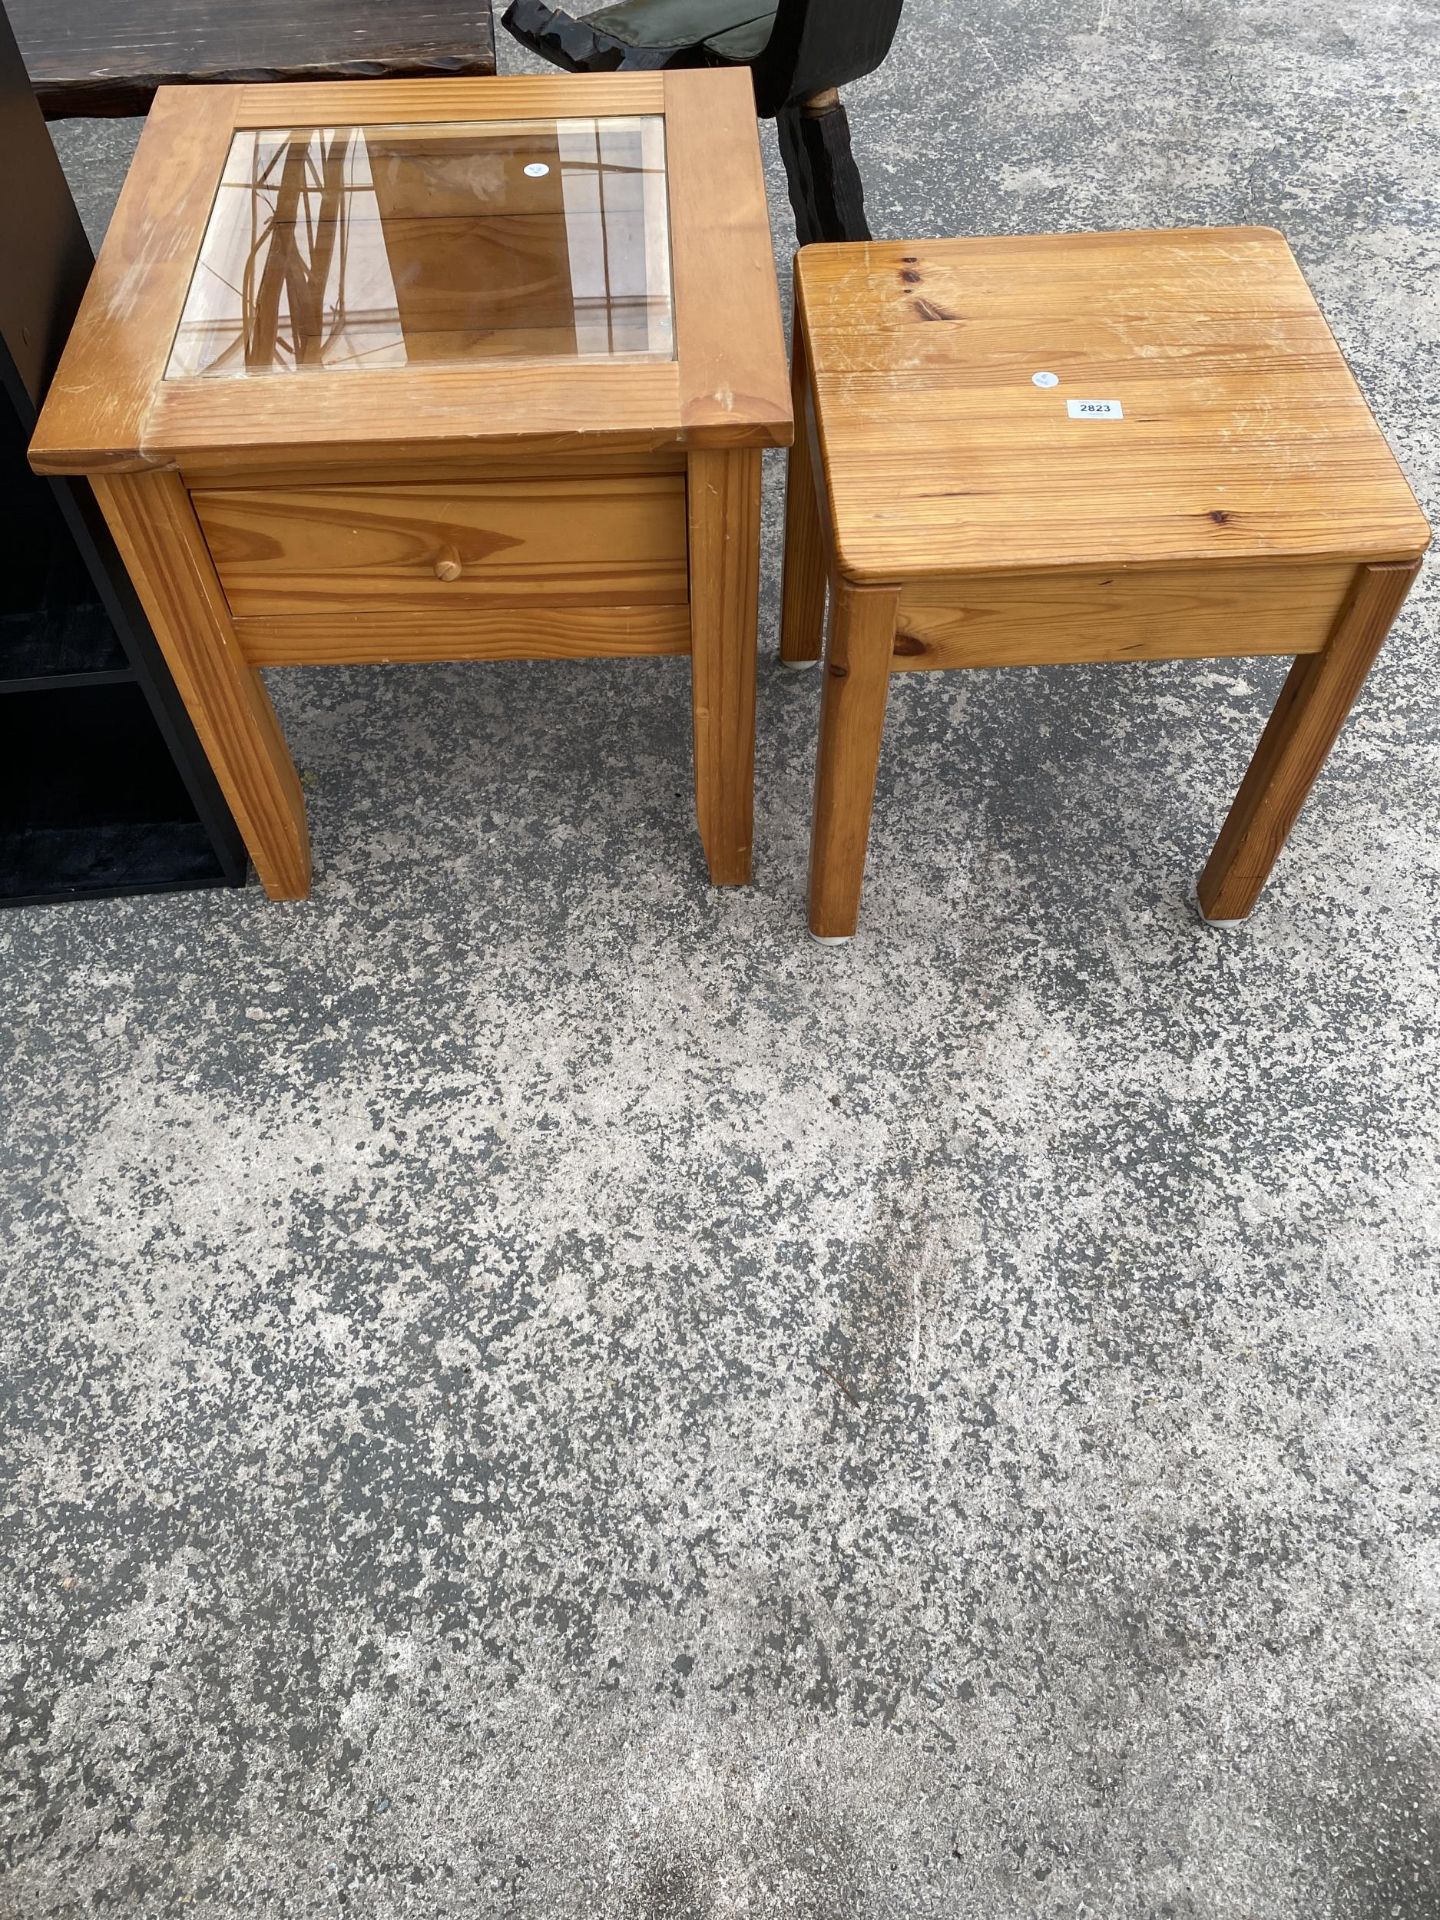 A PINE STOOL AND PINE LAMP TABLE WITH DRAWER AND GLASS TOP